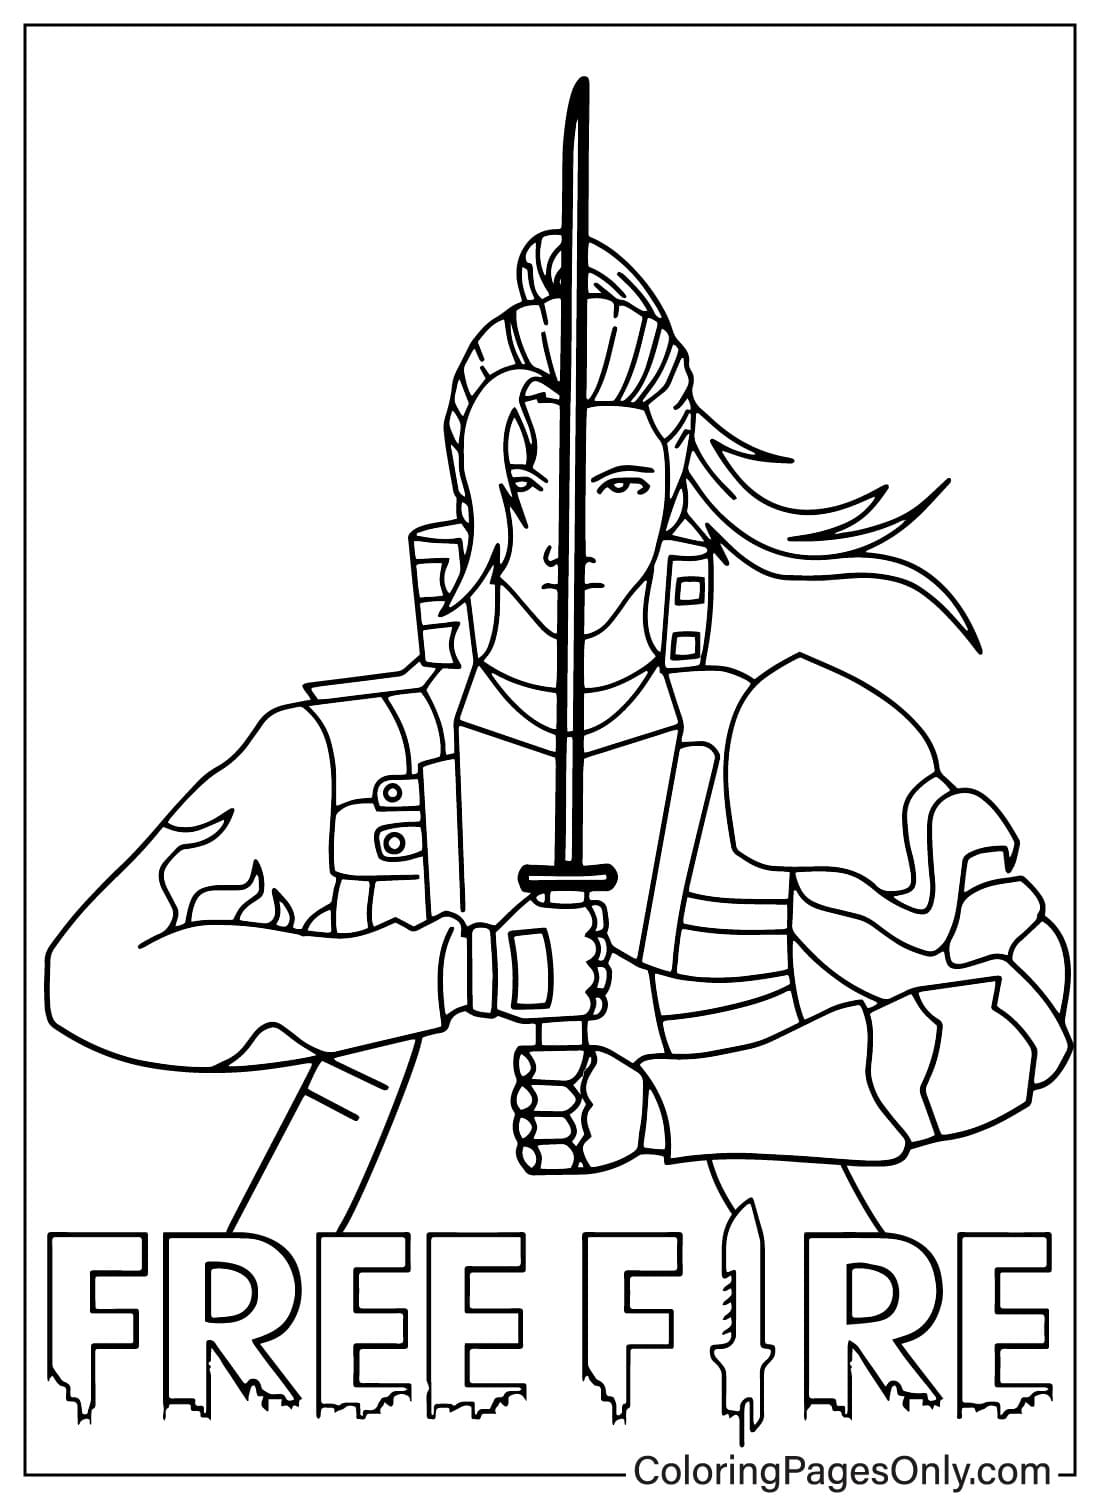 Free Fire Character from Free Fire